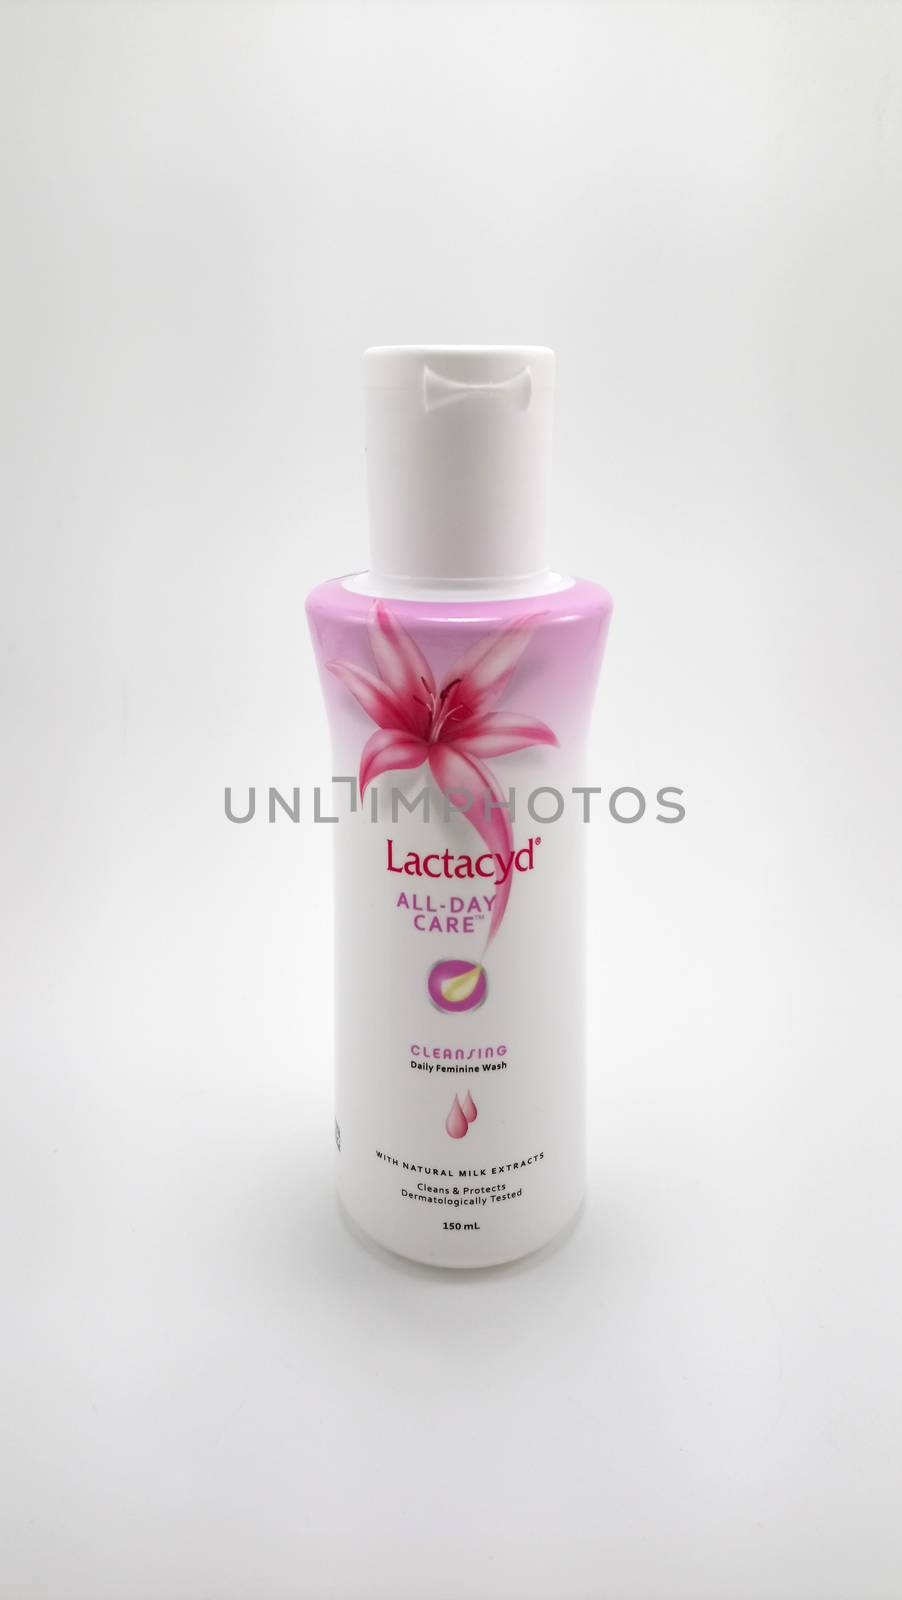 MANILA, PH - JUNE 23 - Lactacyd all day care cleansing daily feminine wash on June 23, 2020 in Manila, Philippines.